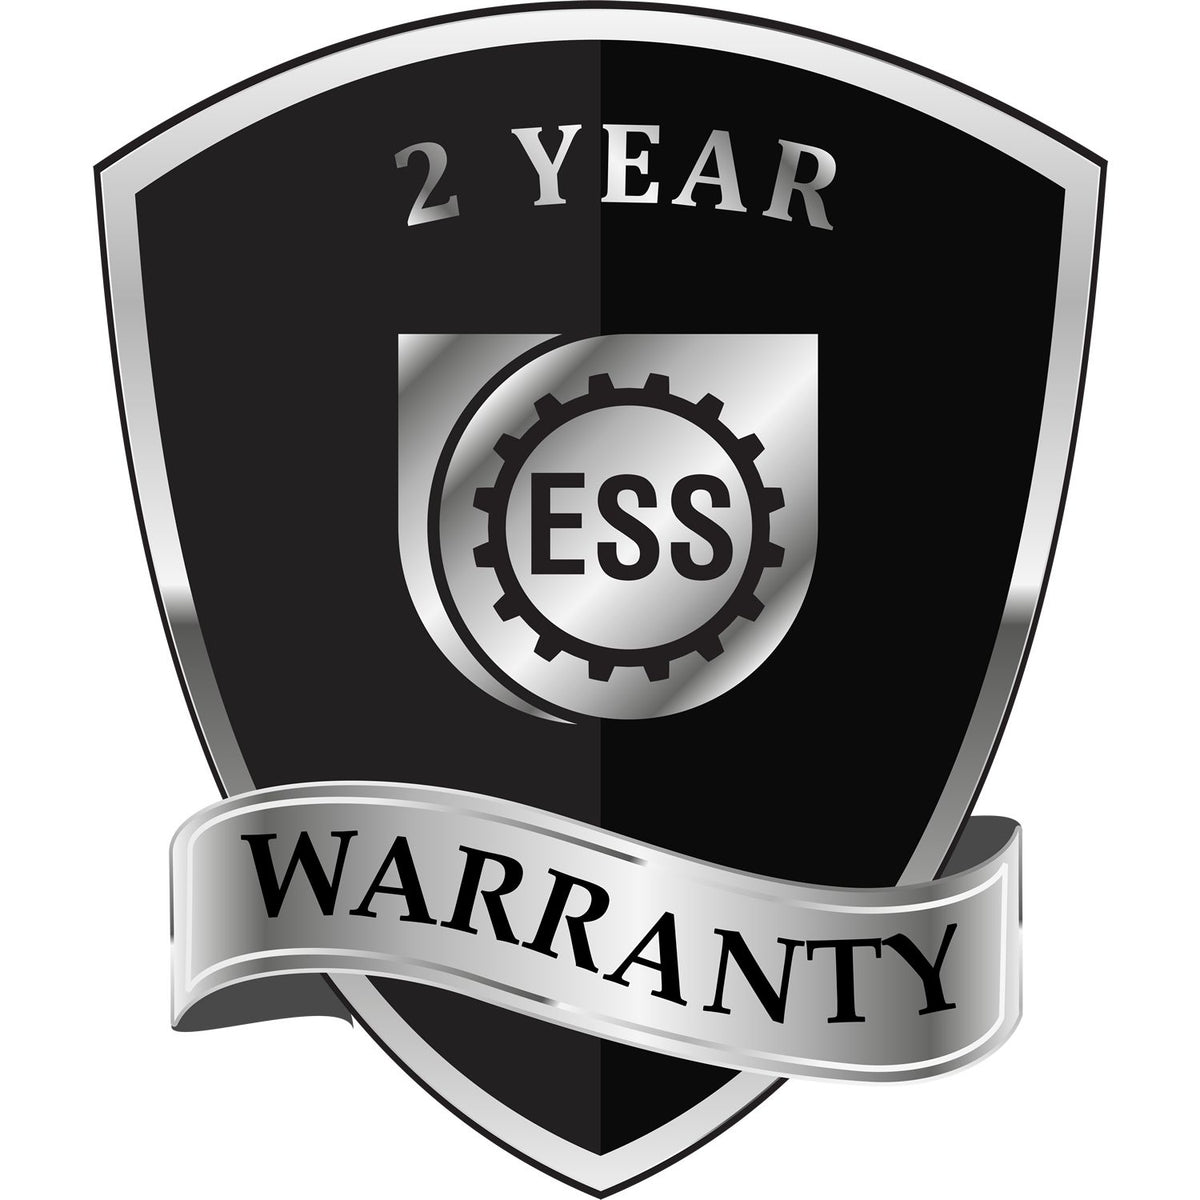 A black and silver badge or emblem showing warranty information for the Hybrid Ohio Geologist Seal